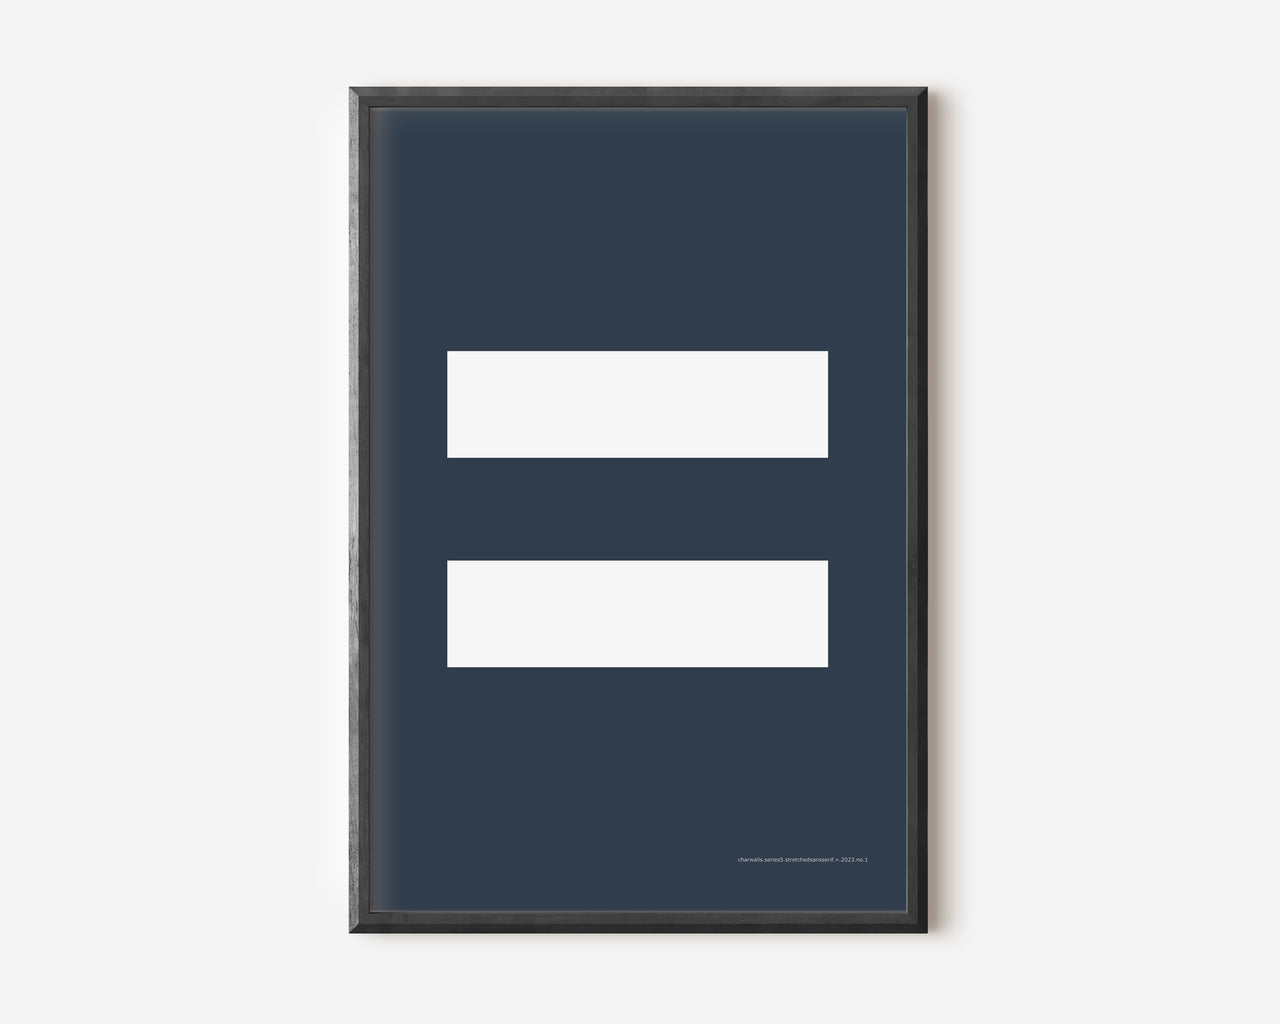 Modern symbol art print with a white equals sign on a navy blue background.